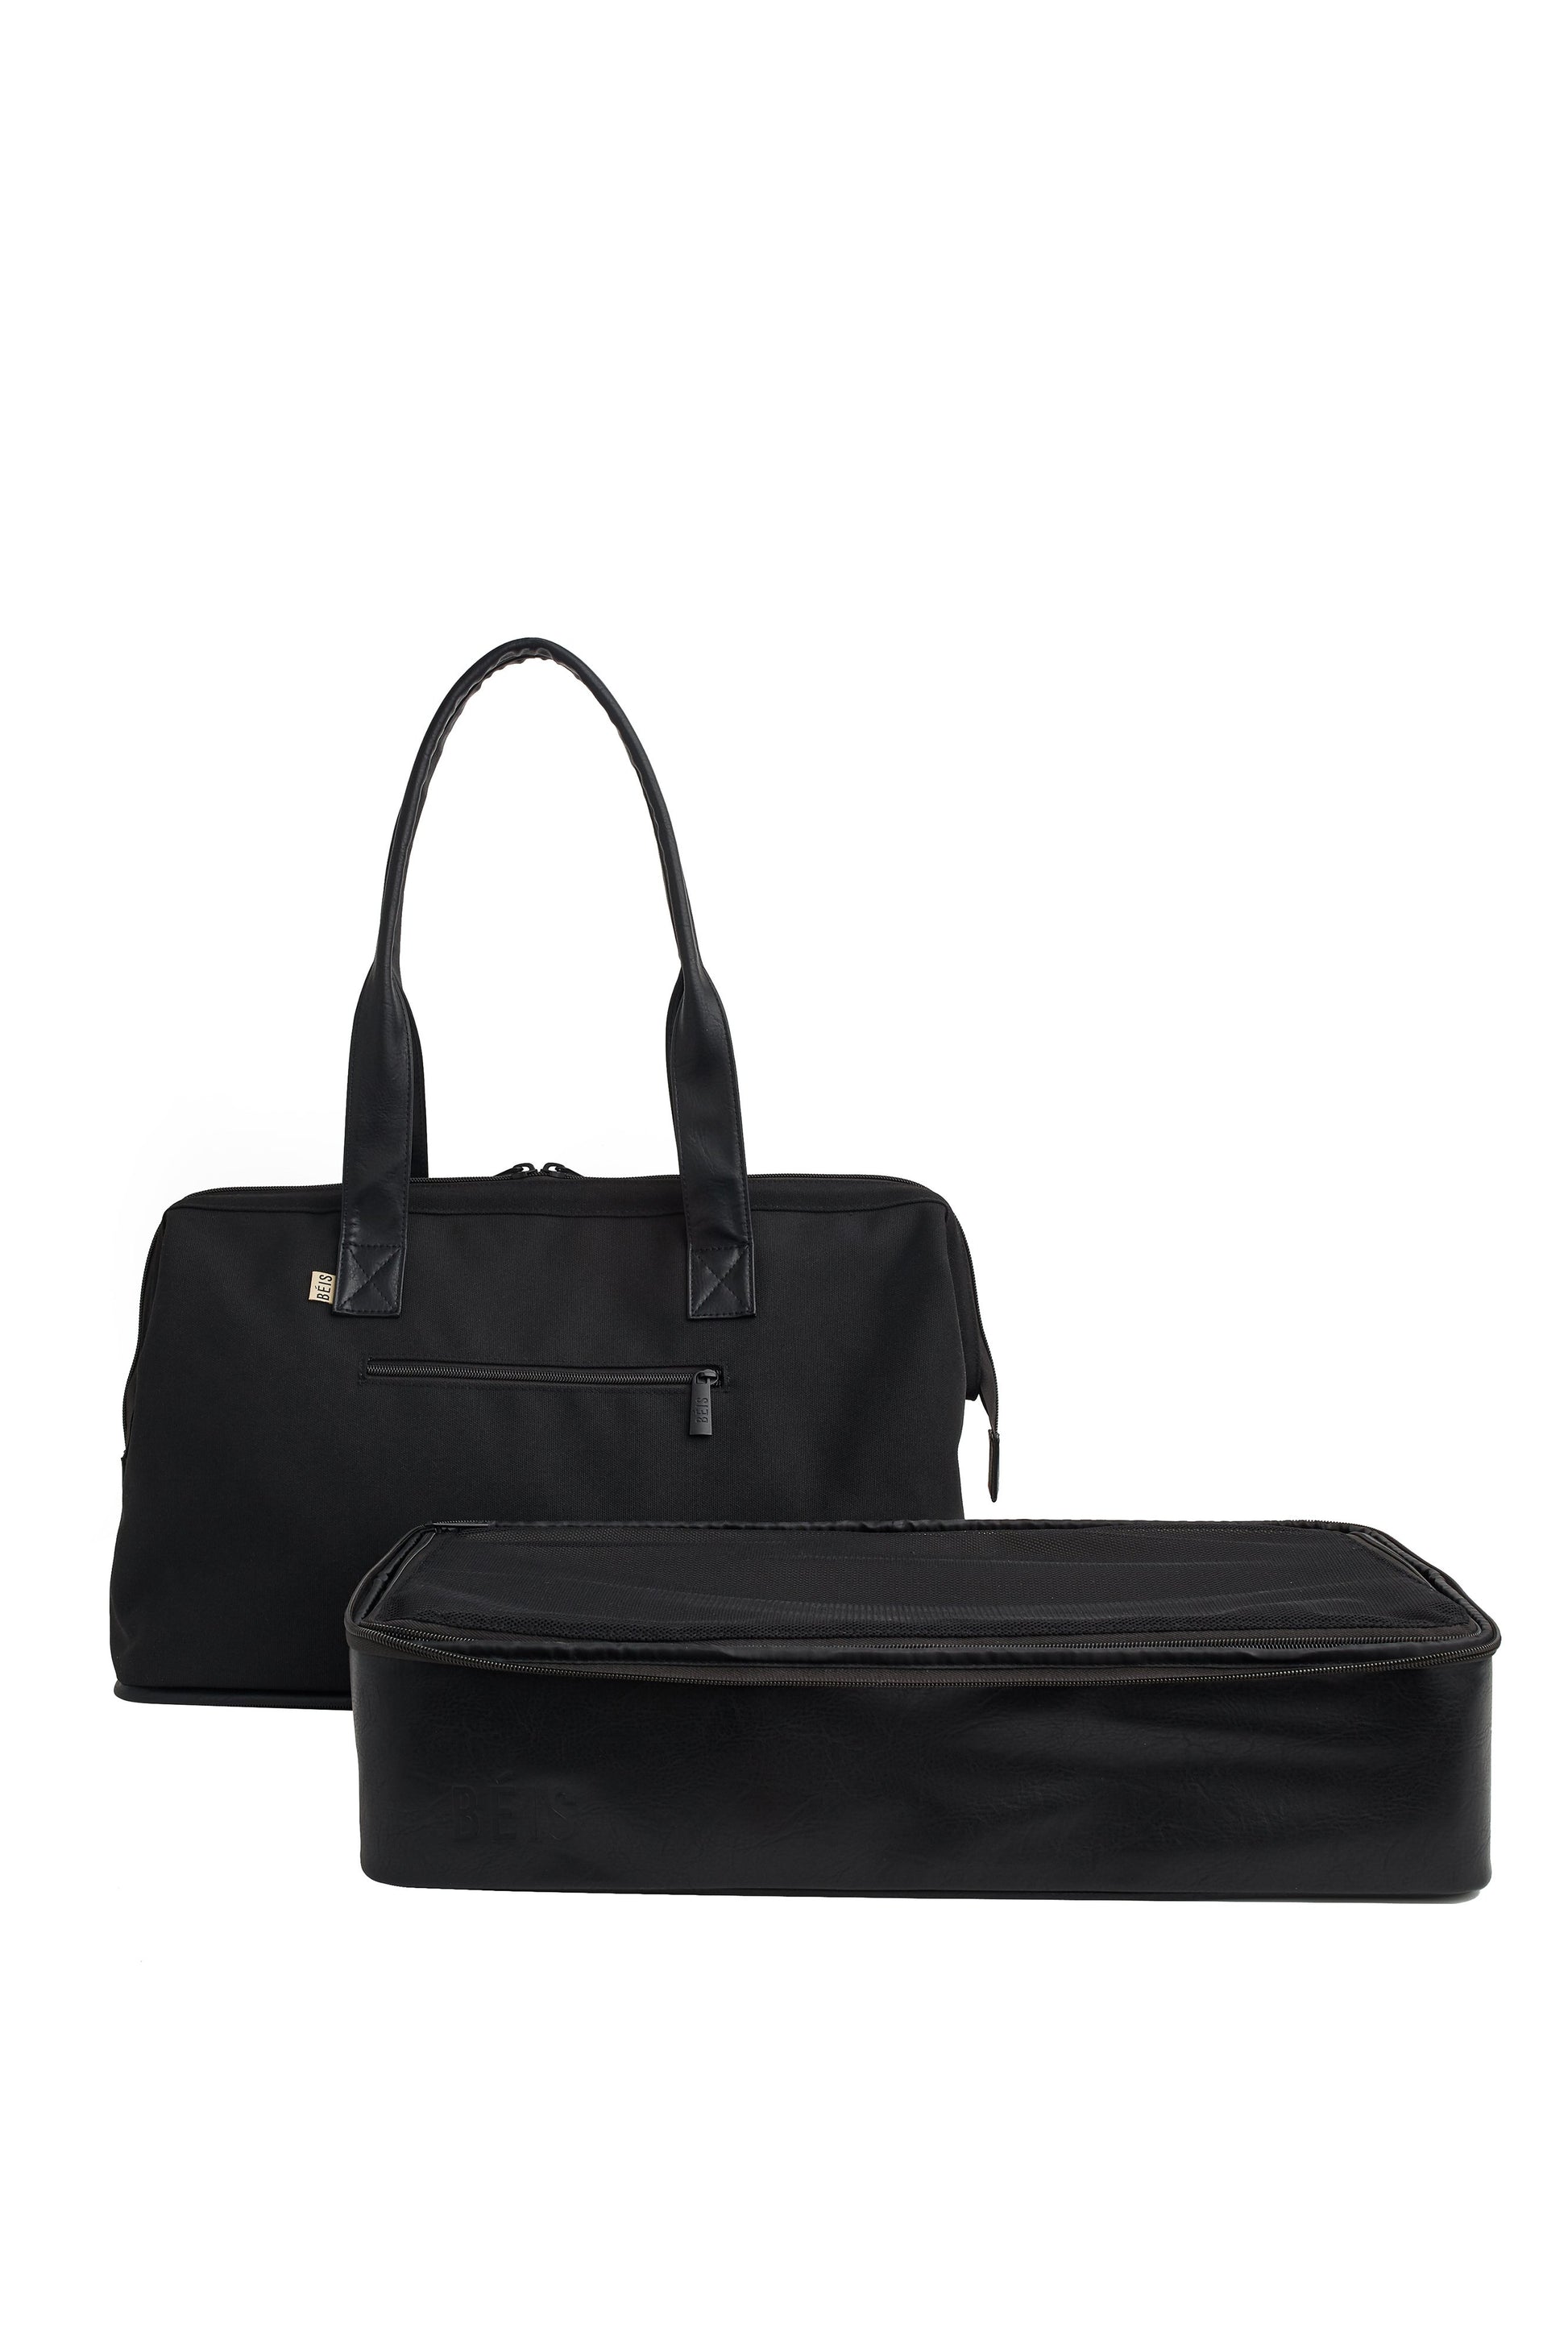 Convertible Weekender Black Removable Compartment